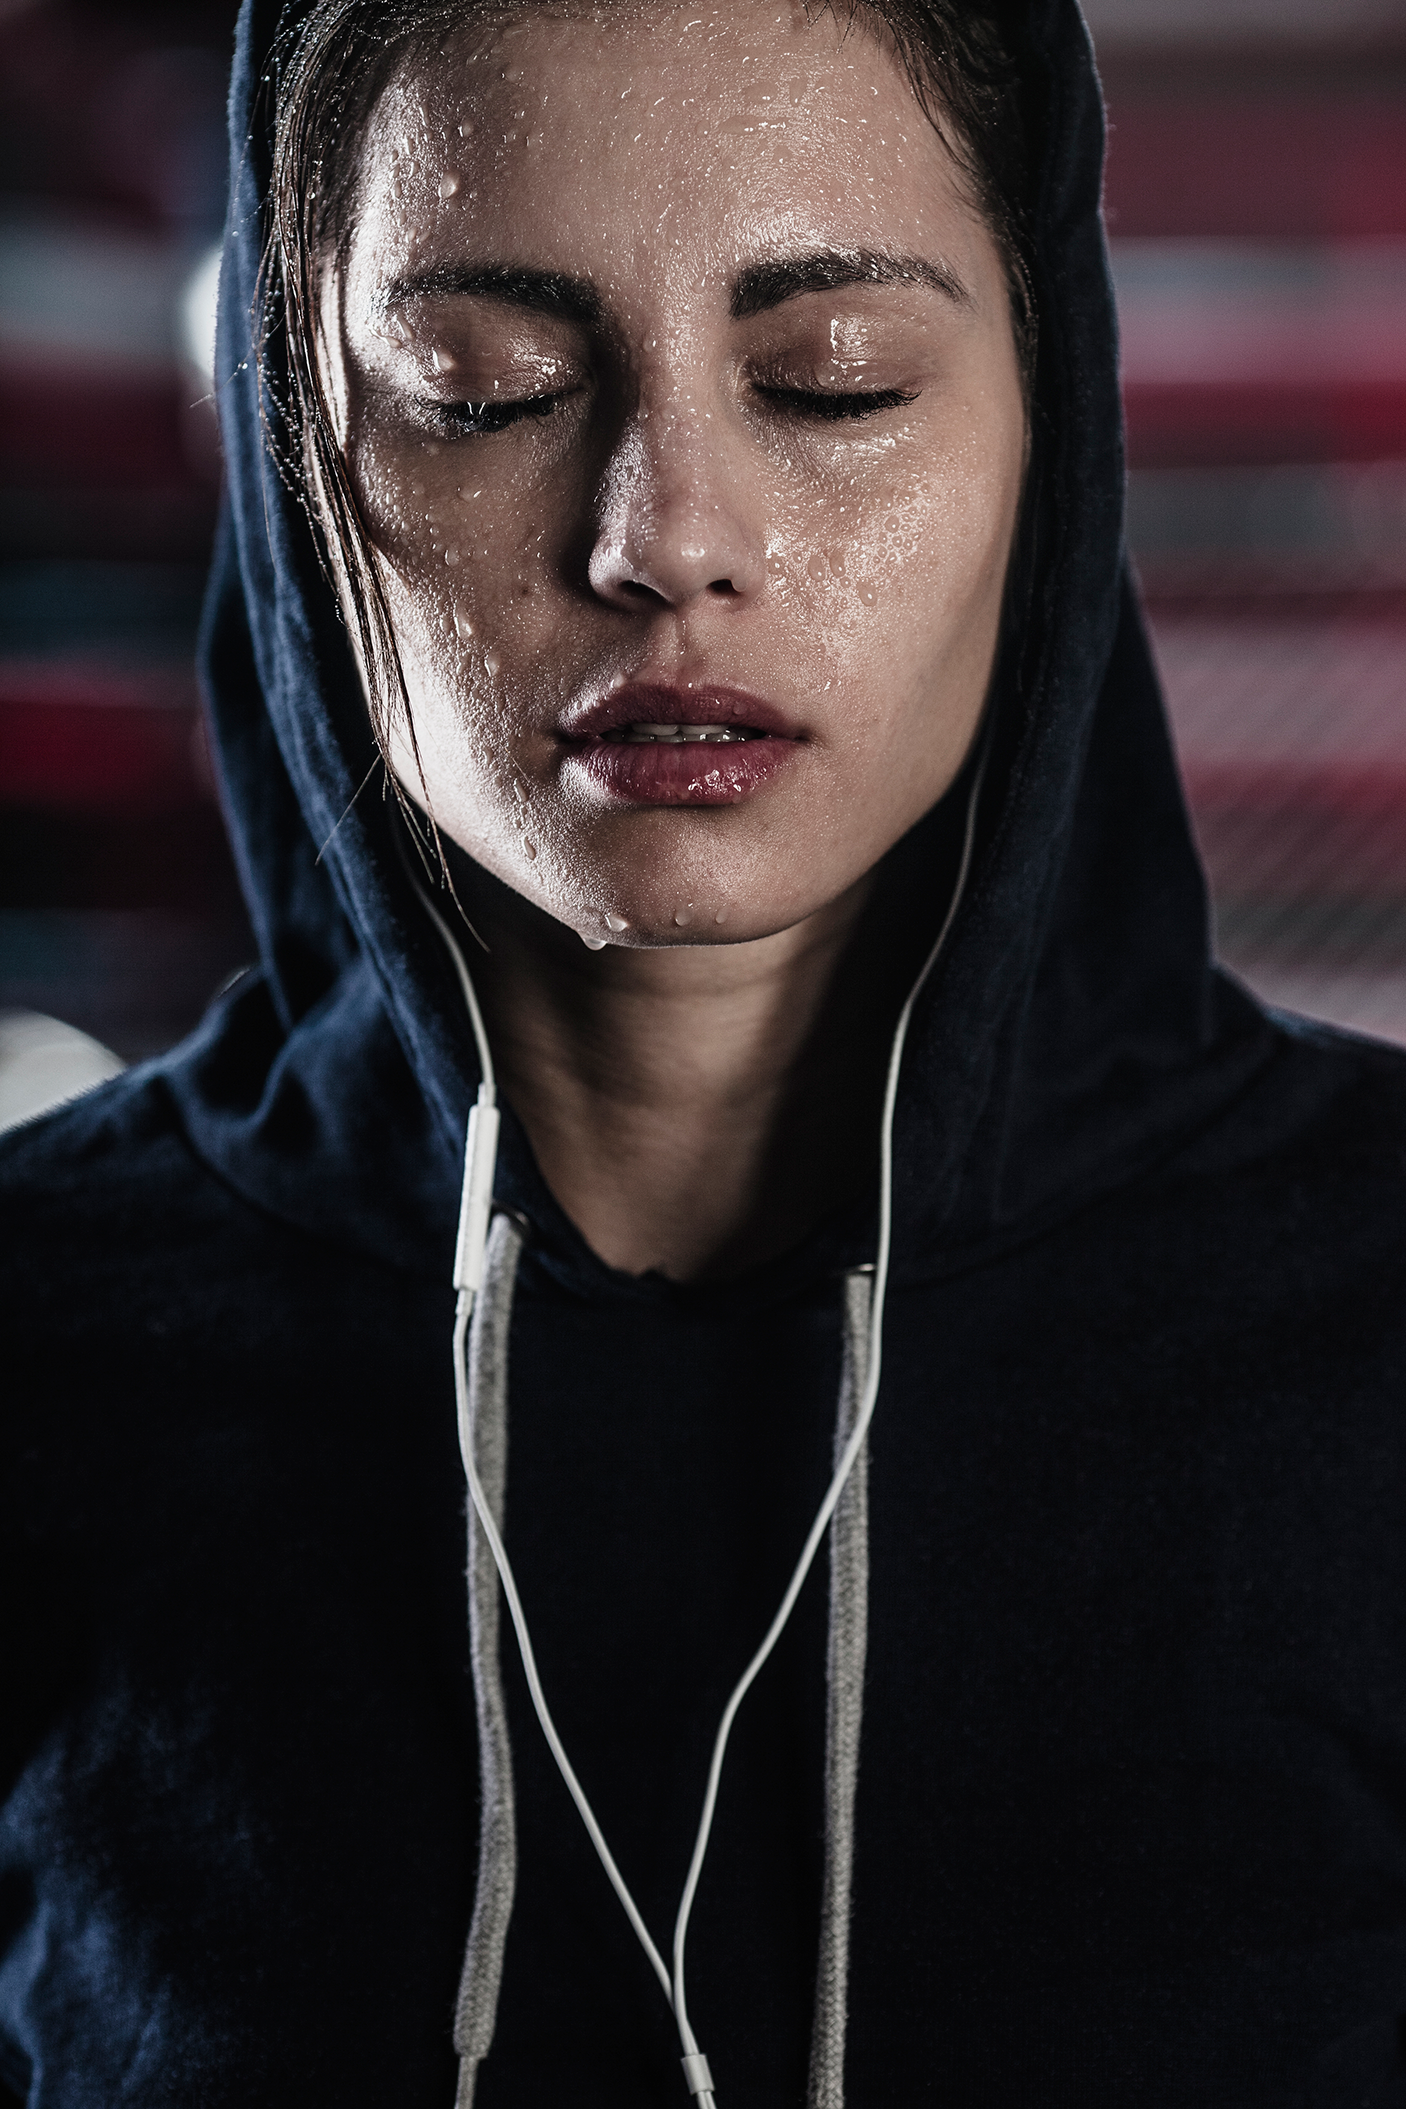 Woman in hooded shirt with sweat on face at gym - stock photo